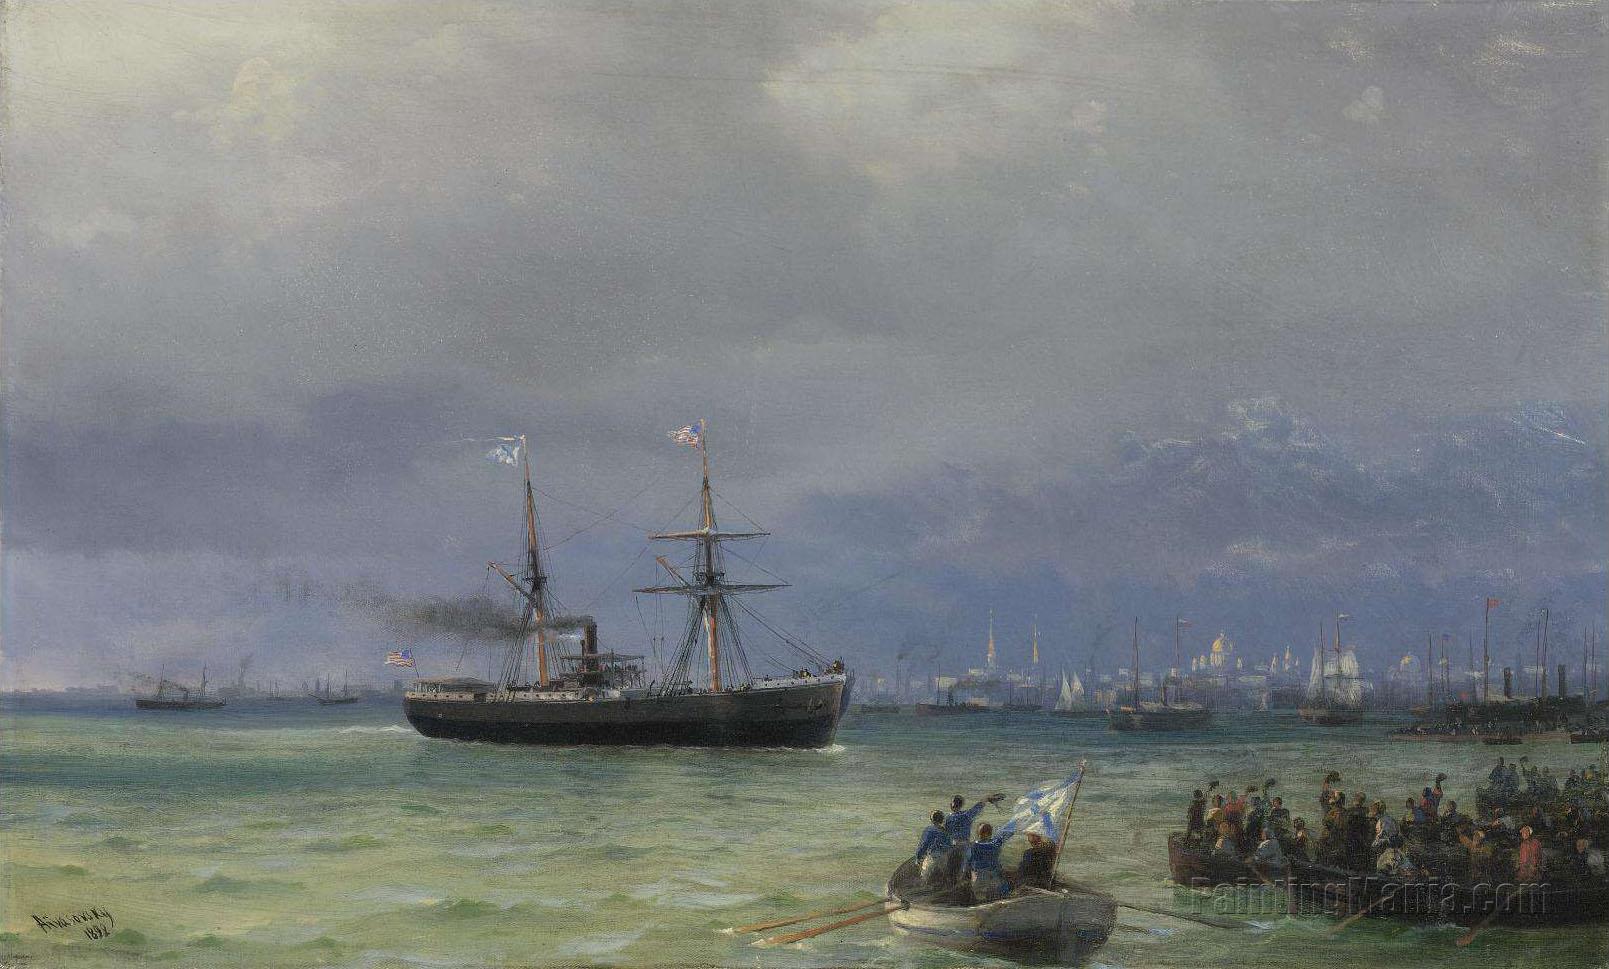 The Relief Ship